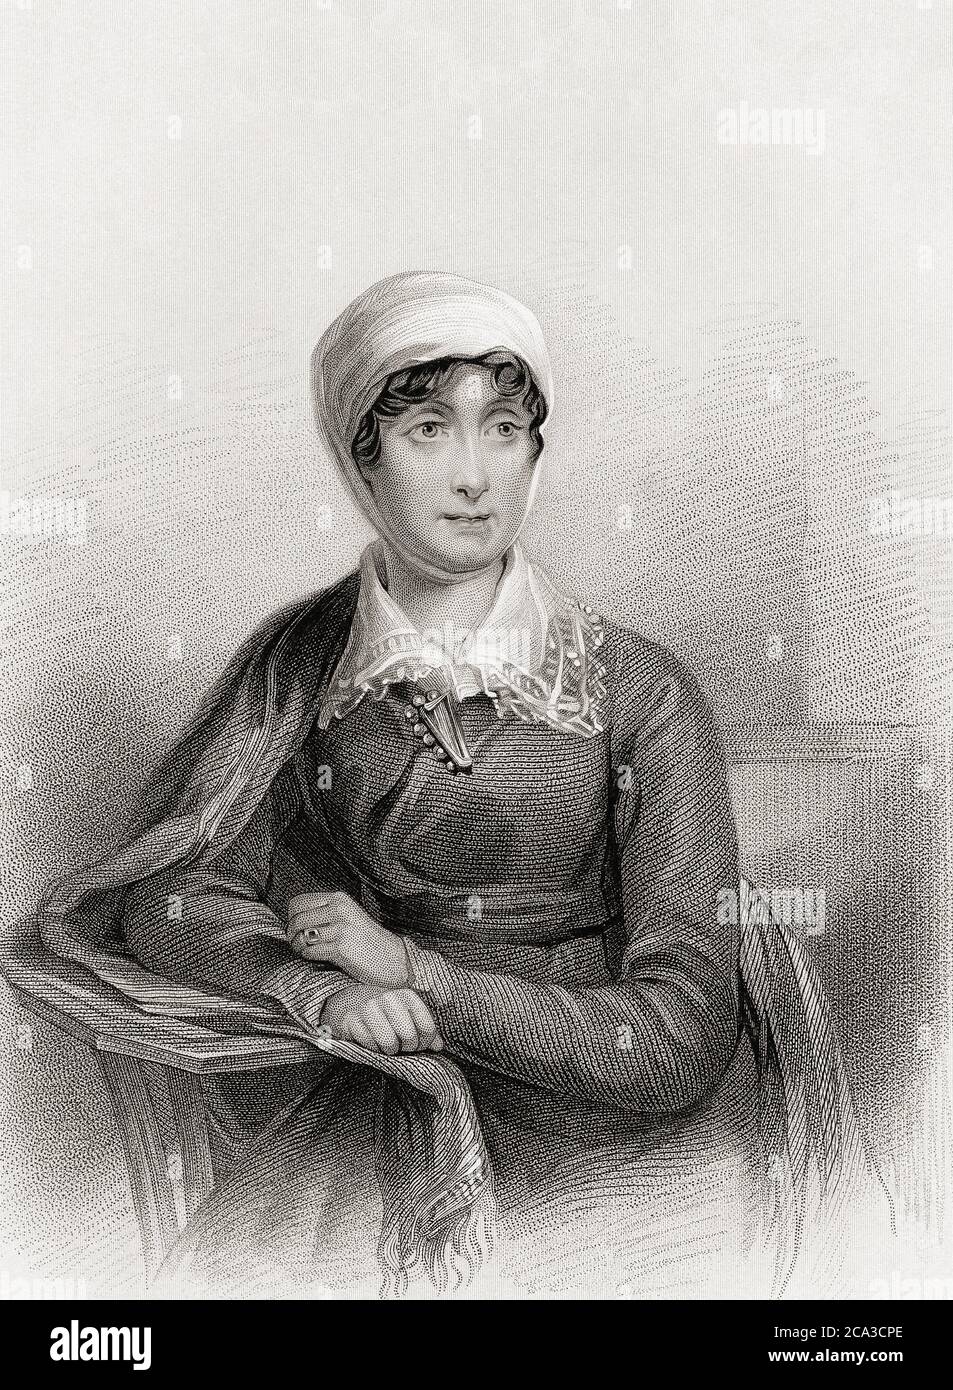 Joanna Baillie, 1762 - 1851. Scottish poet and dramatist. After an engraving by H. Robinson from a painting by John James Masquerier. Stock Photo